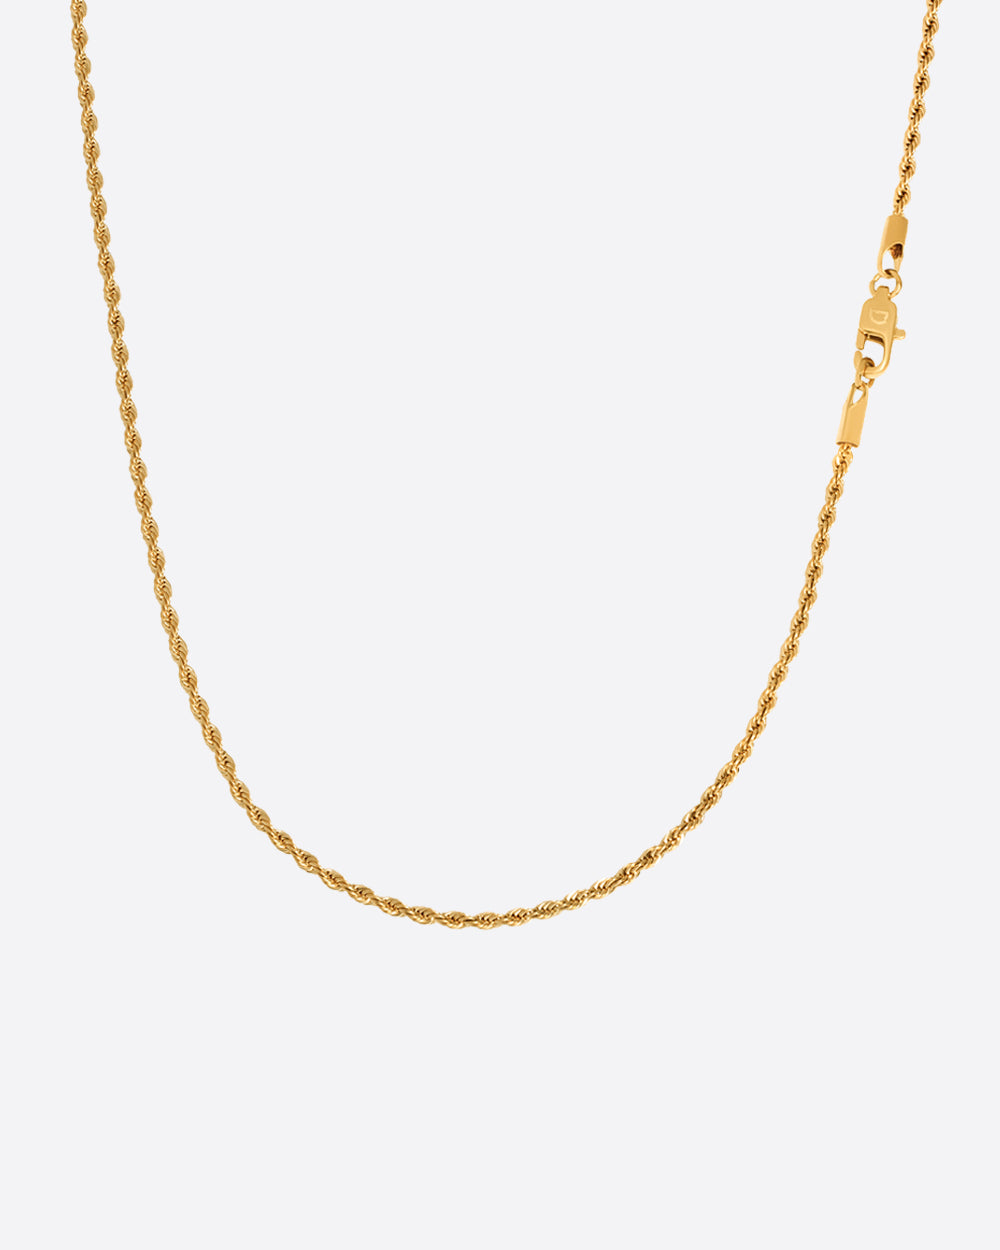 CLEAN ROPE CHAIN. - 2MM 18K GOLD